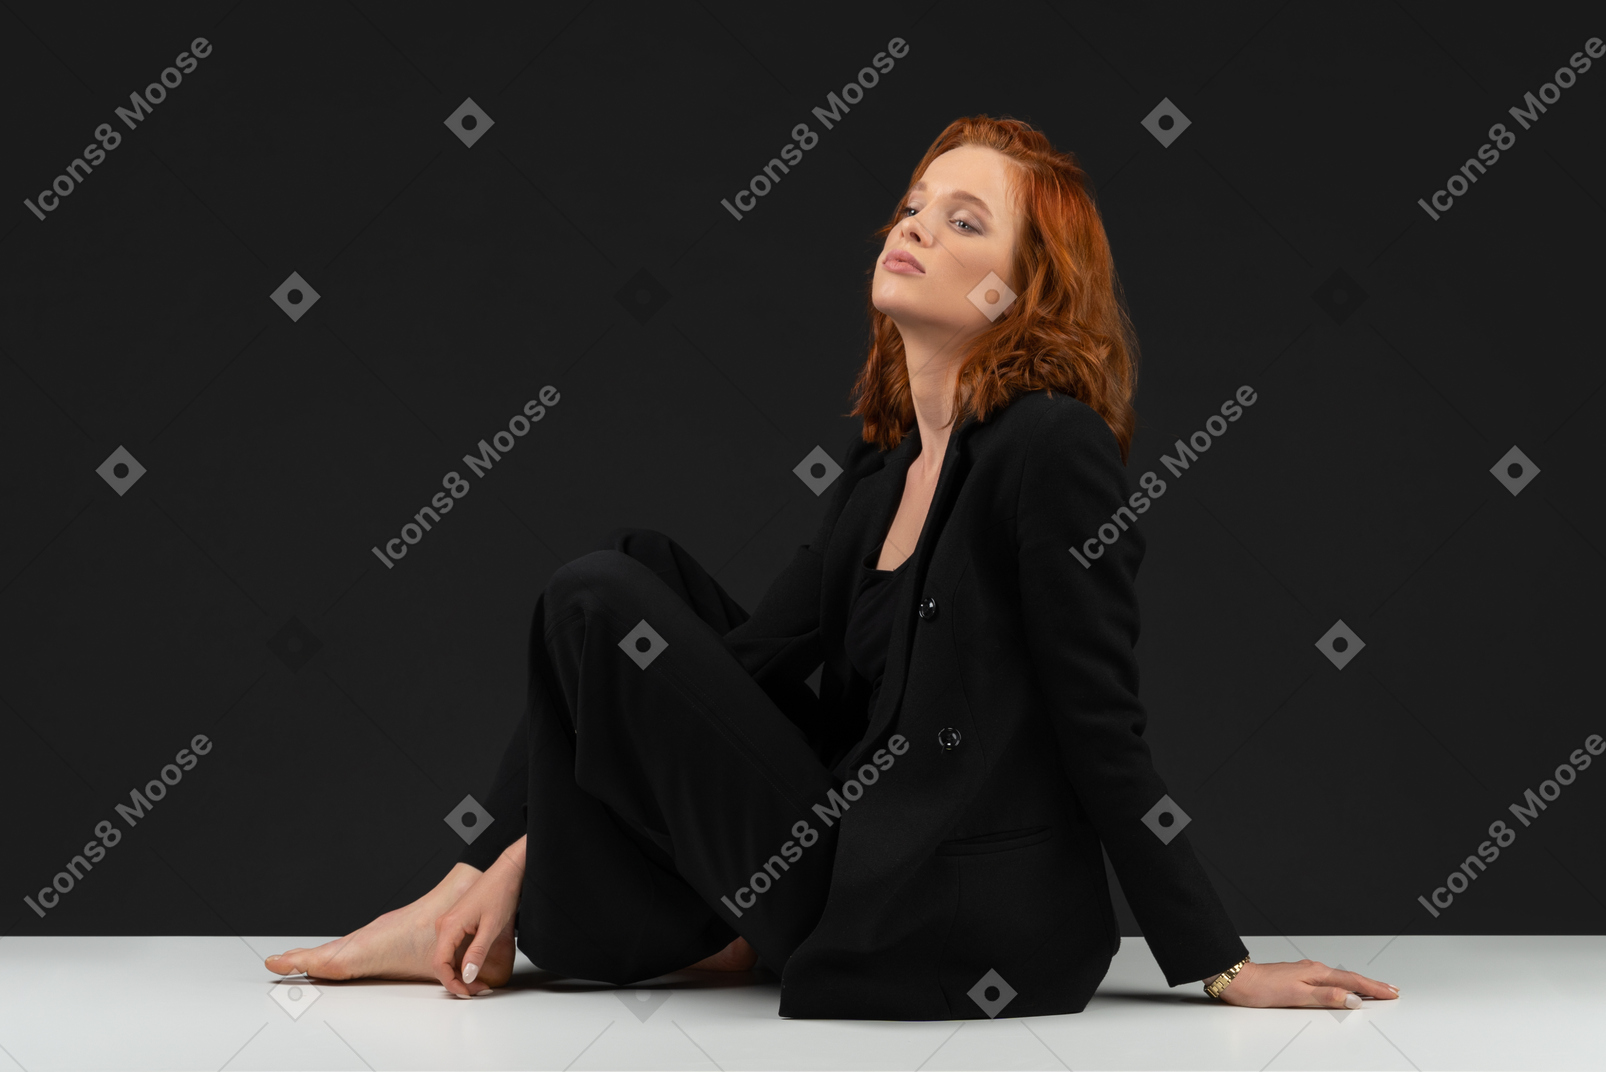 A side view of the beautiful woman sitting on the table with closed eyes